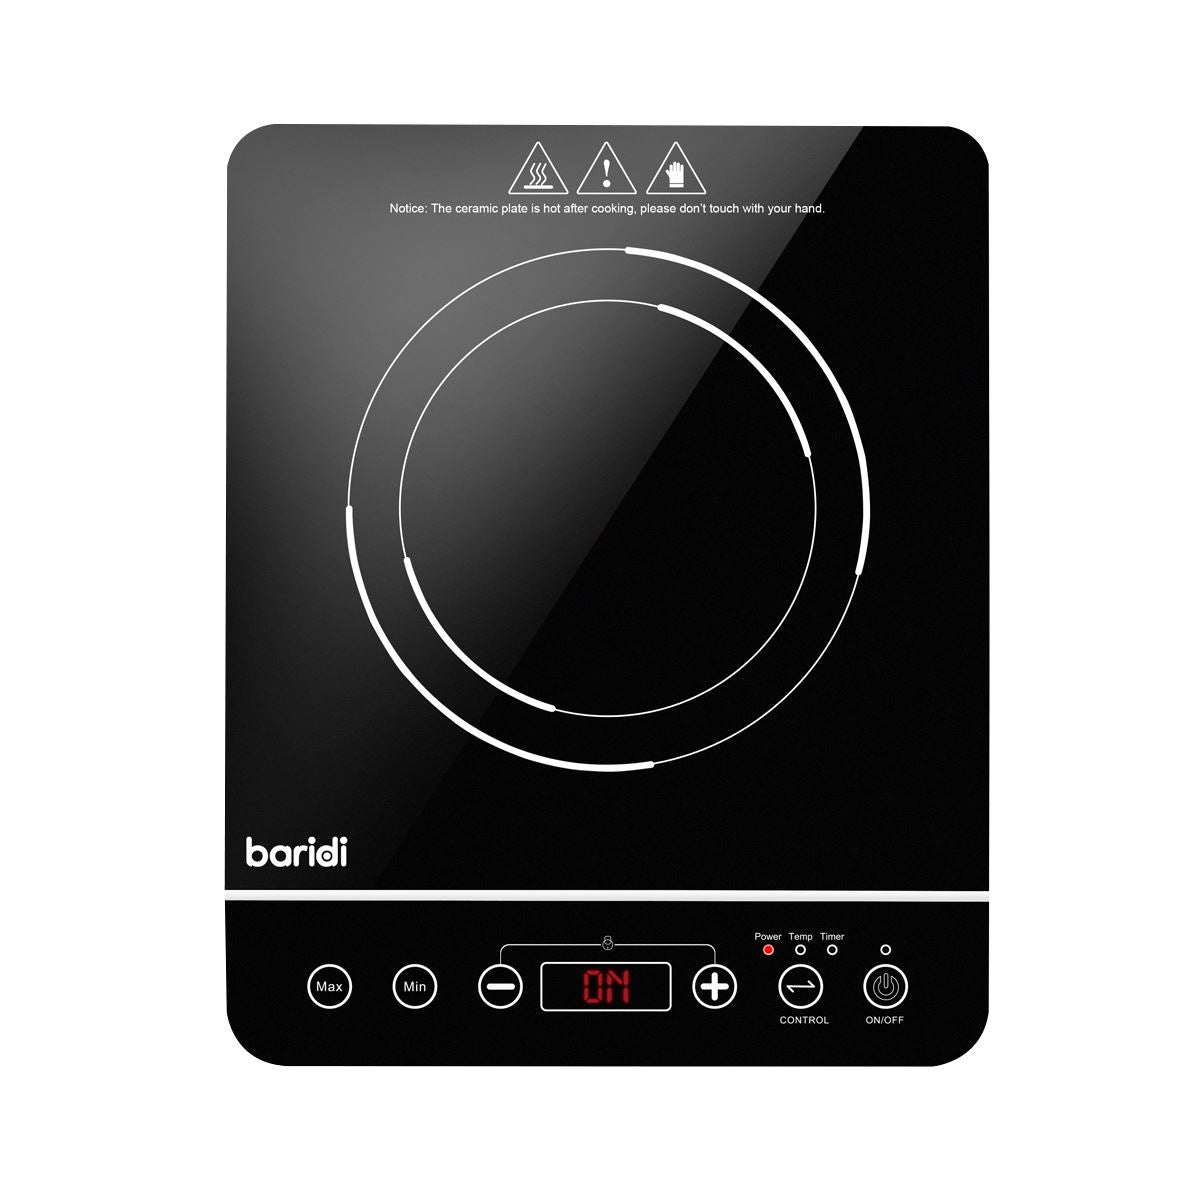 Baridi Induction Hob: Single Zone with 13A Plug, 10 Power Settings 200W-2000W, Touch Controls, 3-Hour Timer Function, Child Lock, Black